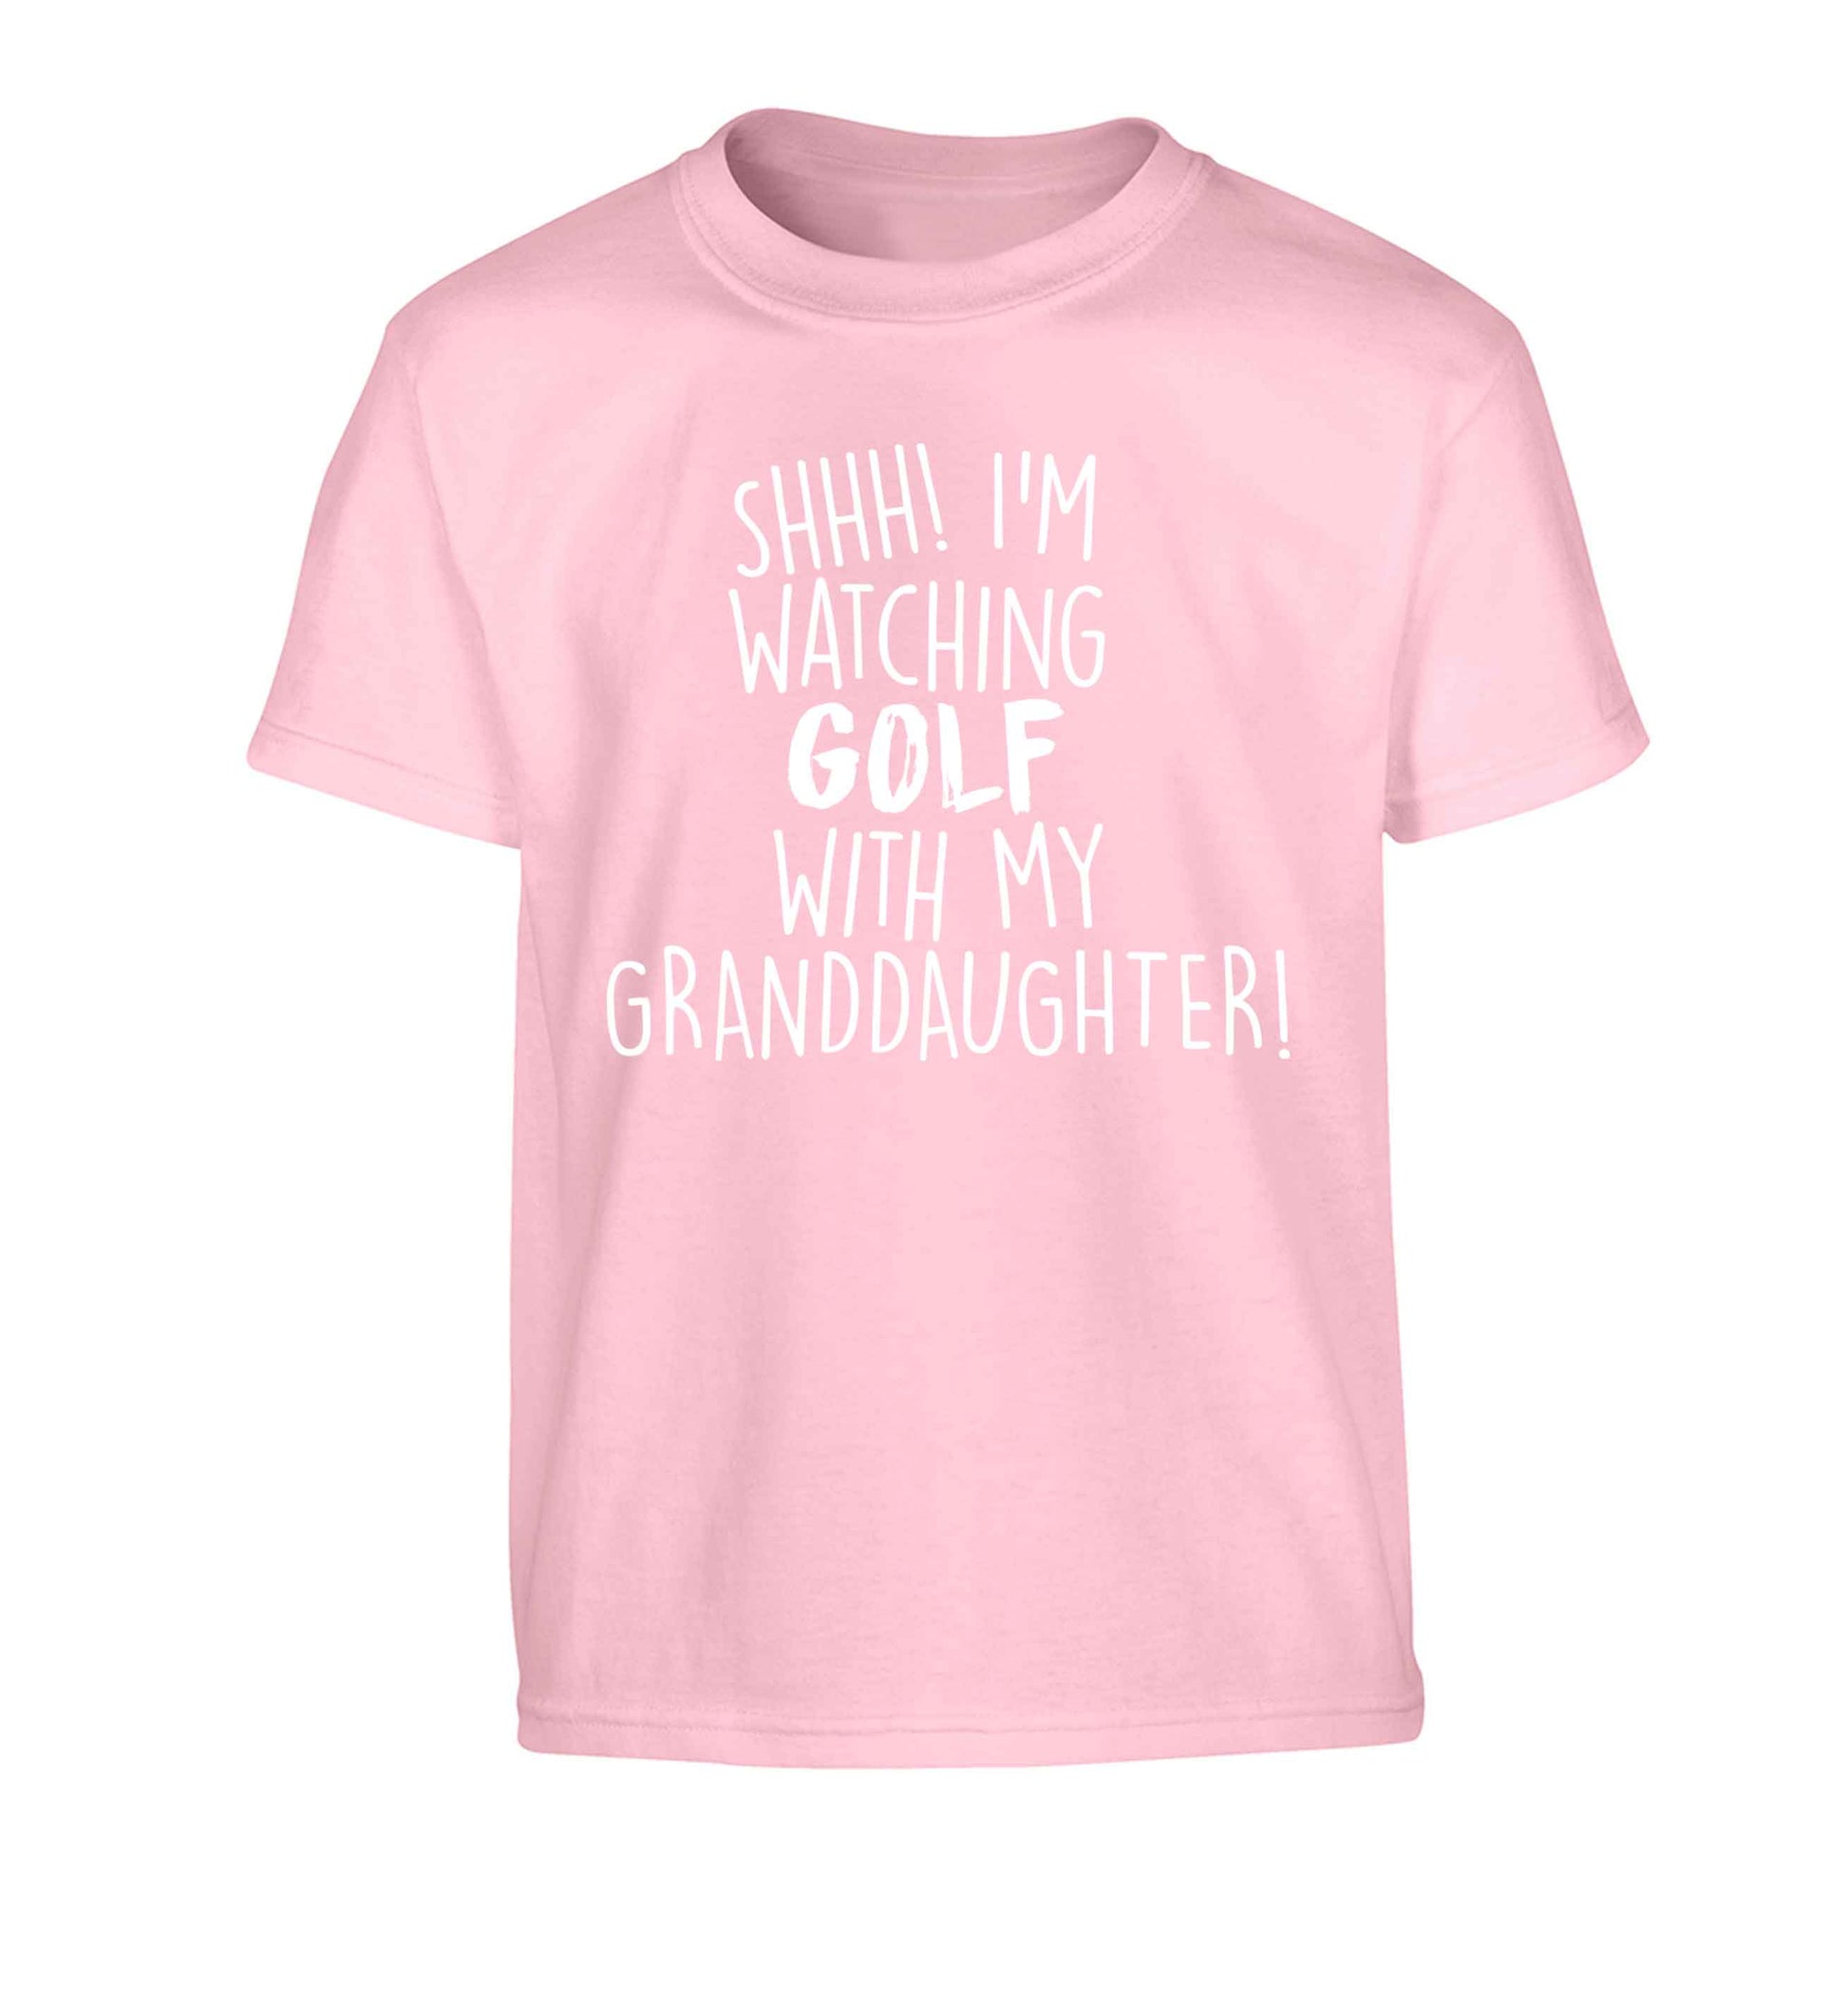 Shh I'm watching golf with my granddaughter Children's light pink Tshirt 12-13 Years